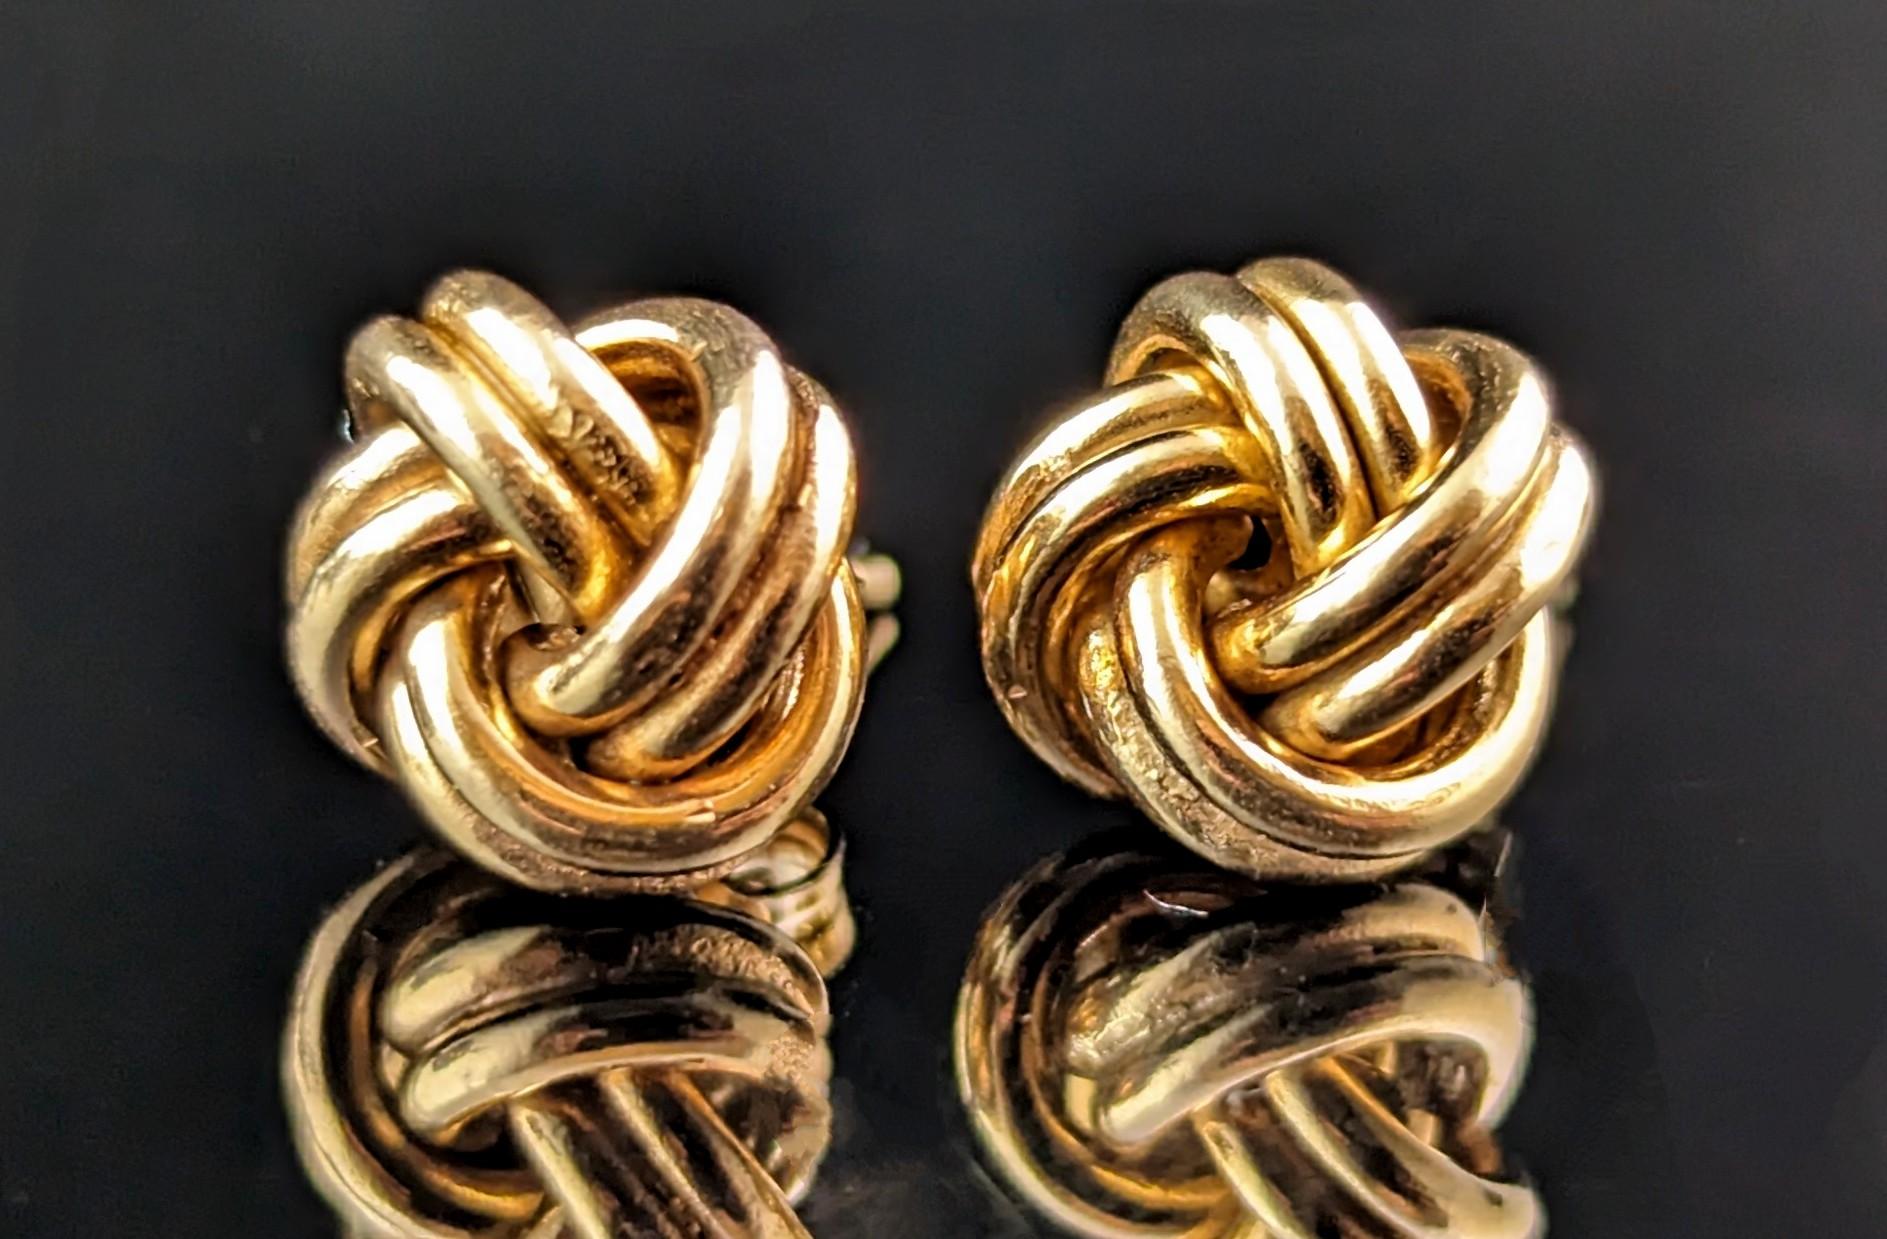 A lovely little chunky pair of vintage 9ct gold knot earrings.

A design that has been loved and revered for centuries and with it's design rooted in the ever popular Victorian era lovers knot.

These earrings are hollow making them lightweight and